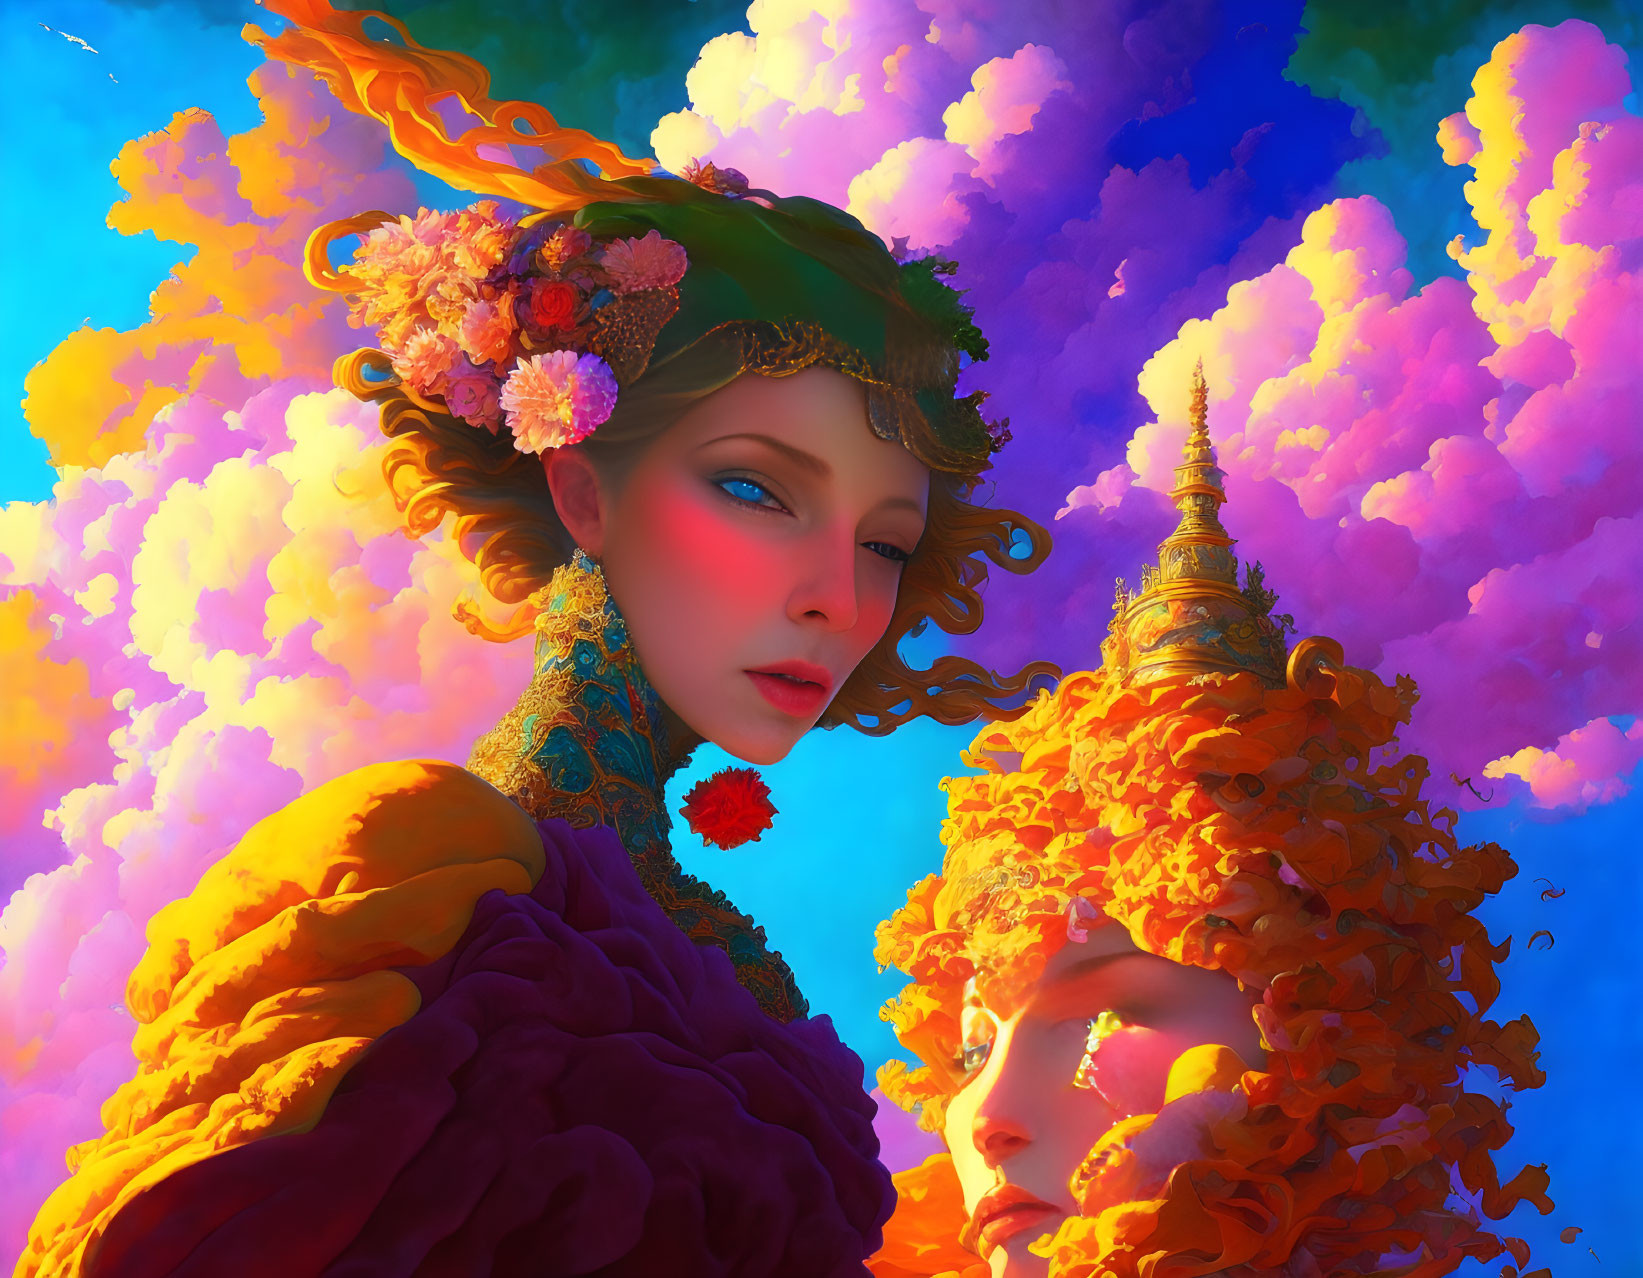 Digital artwork featuring woman in floral headdress and ornate garment with golden figure against vibrant cloud backdrop